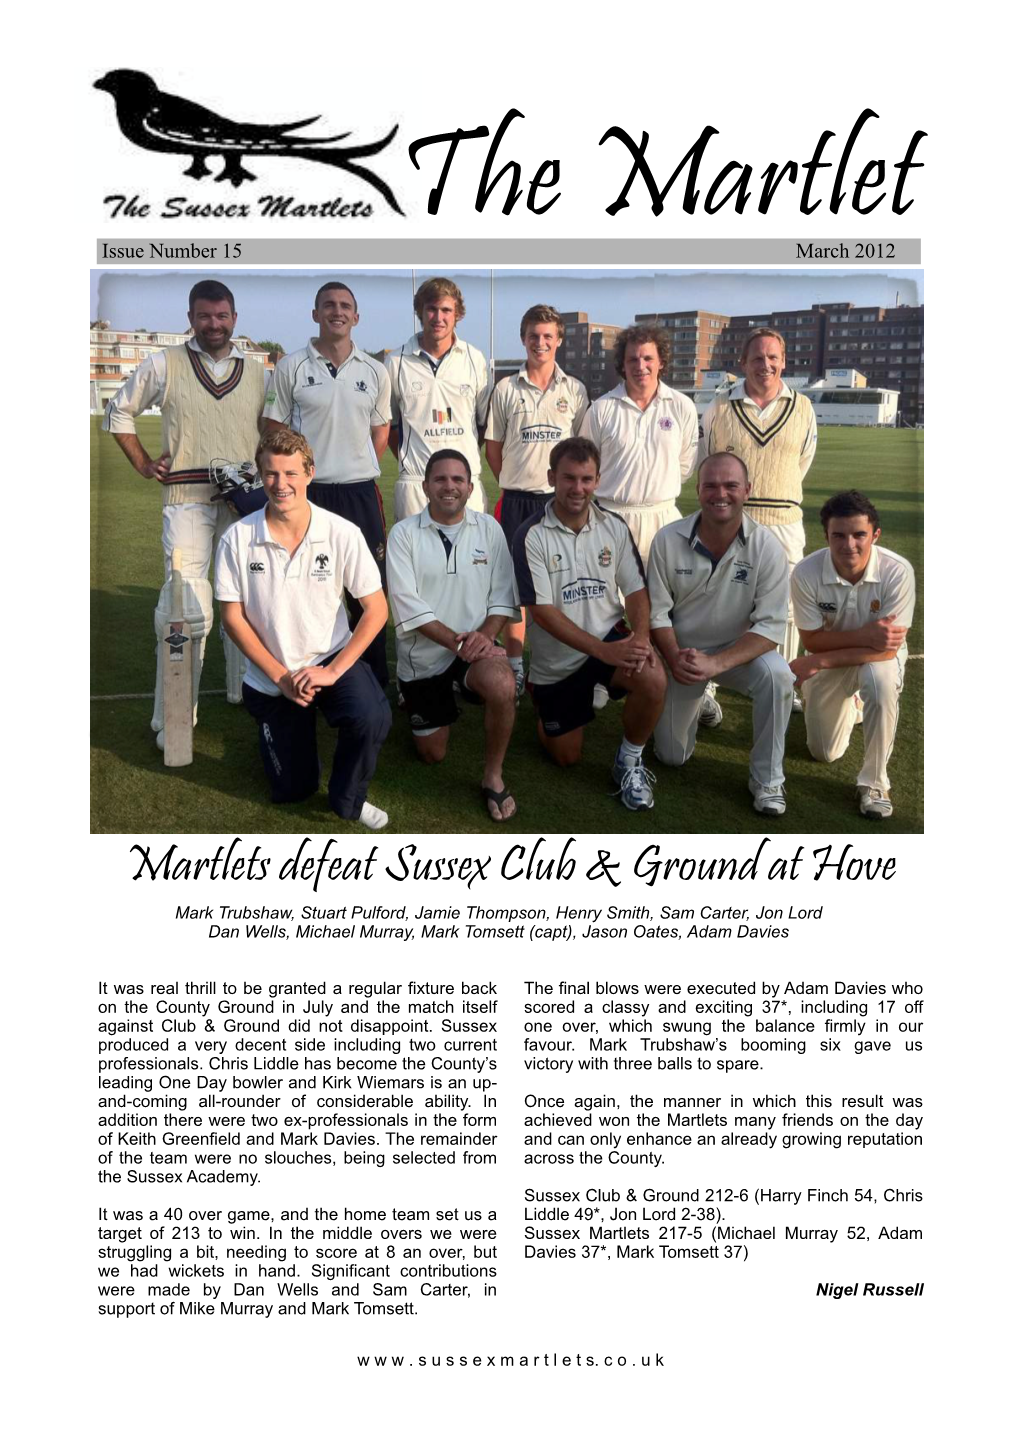 Martlets Defeat Sussex Club & Ground at Hove